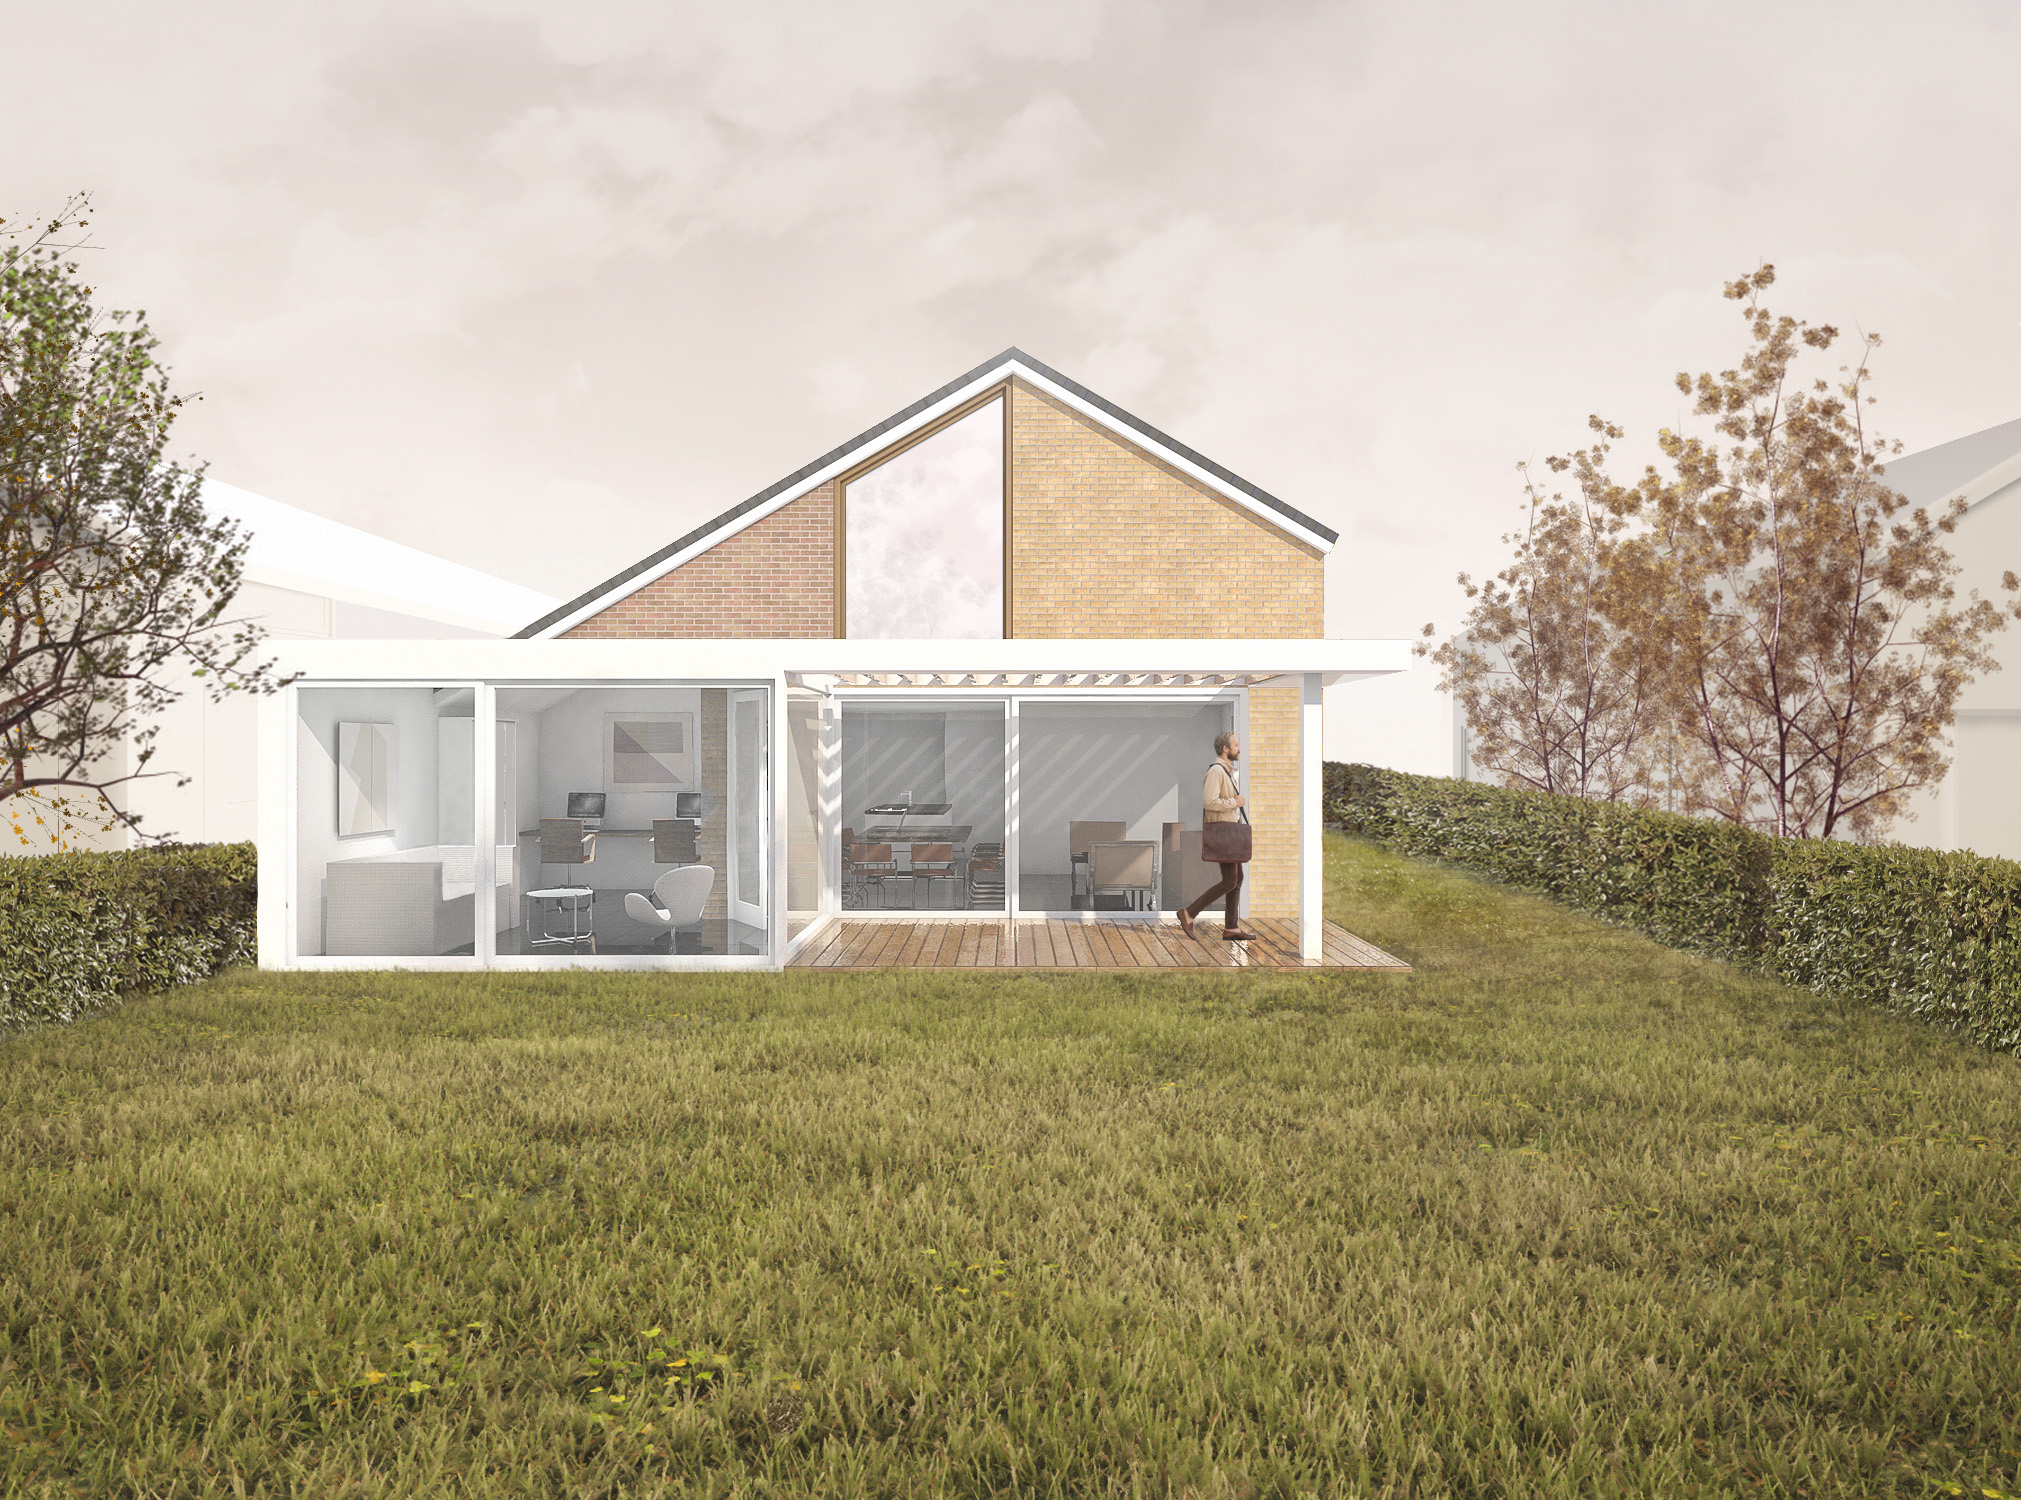 Architectural visualisation showing the front façade of the private residence and the garden extension as seen from the garden, featuring an operable glazed extension with adjacent semi-covered patio space on the ground floor. The asymmetrical façade articulation is emphasized by a darker and a lighter shade of buff color bricks, on either side of a floor-to-ceiling window on the upper floor. Design by MOST Architecture, Rotterdam.